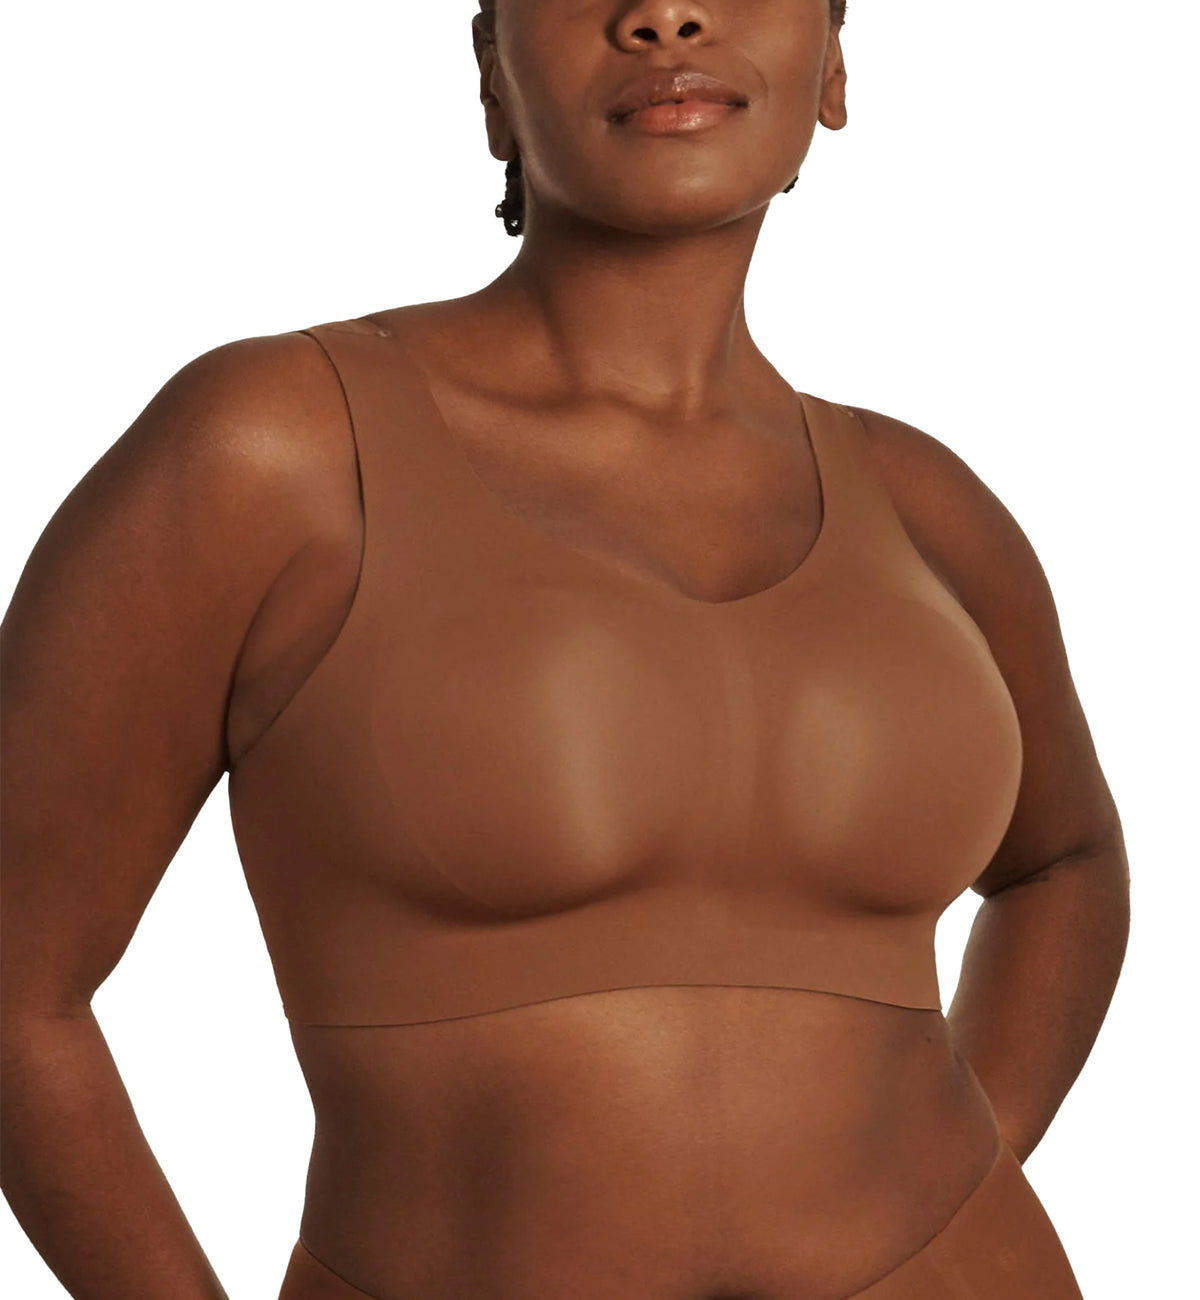 Evelyn &amp; Bobbie DEFY V-Neck Bralette w/ Removable Pads (1728﻿),Small,Clay - Clay,Small